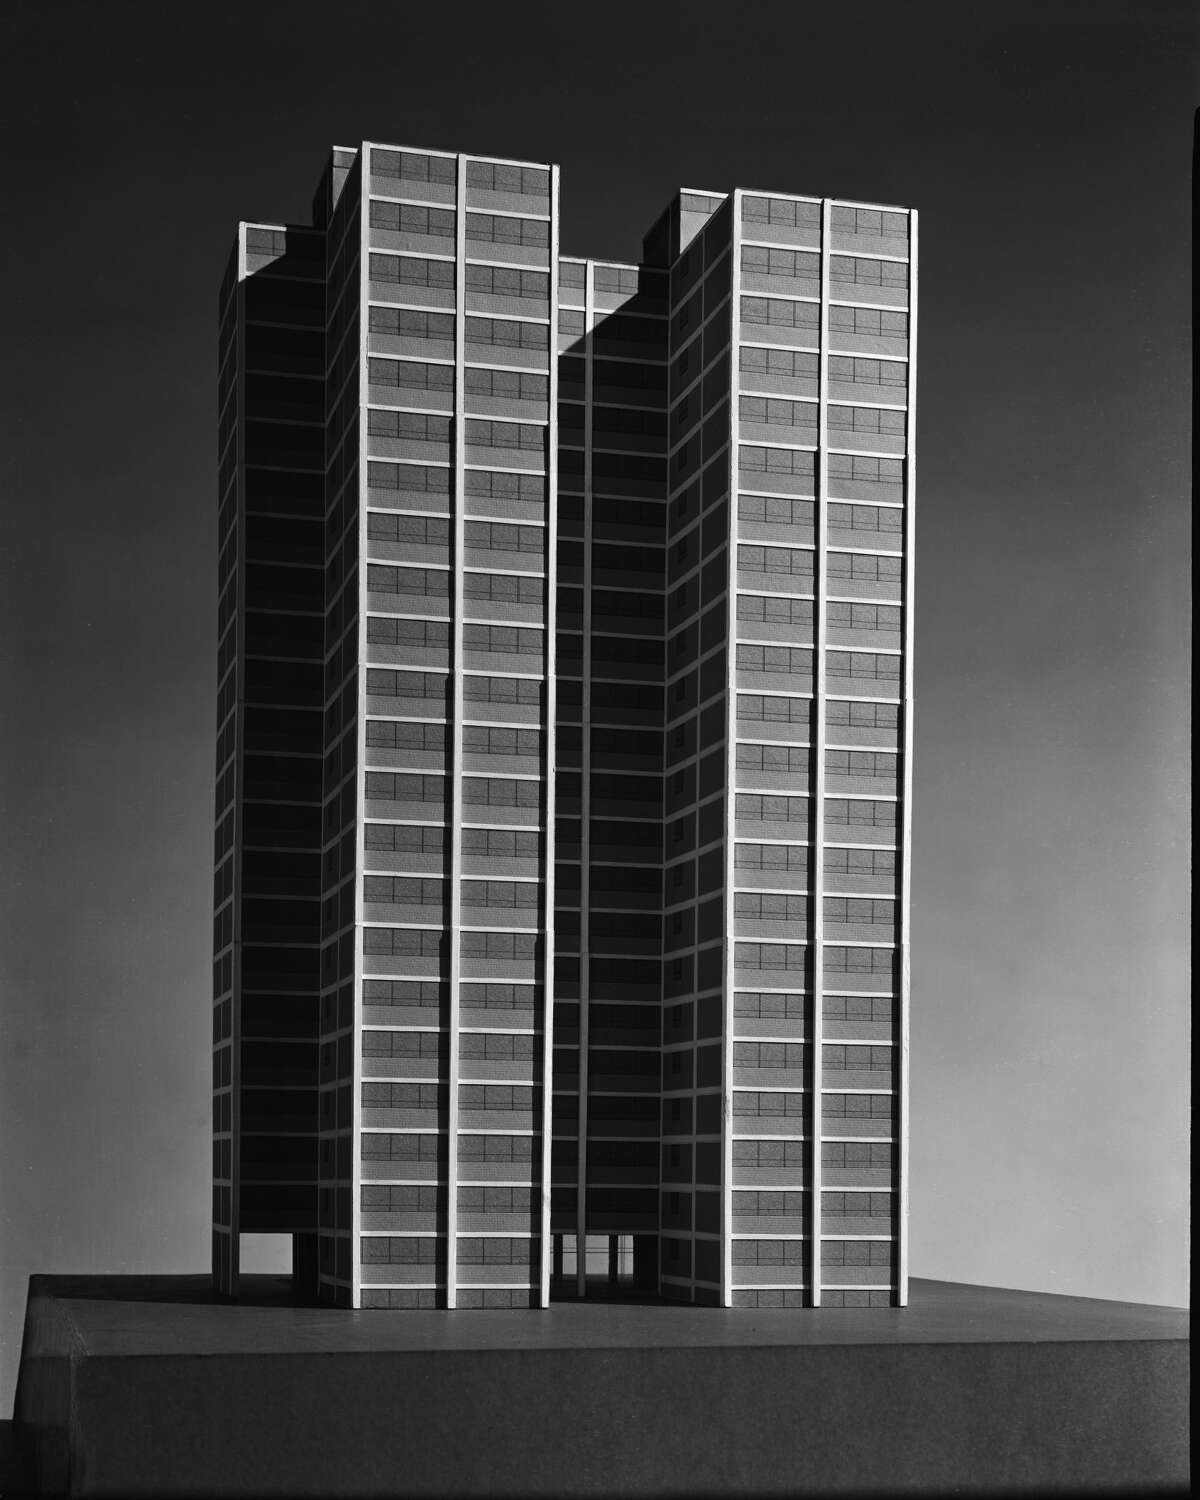 View of architectural model of Promontory Apartments building, showing rear elevation, Chicago, IL, 1946. (Photo by Hedrich Blessing Collection/Chicago History Museum/Getty Images)